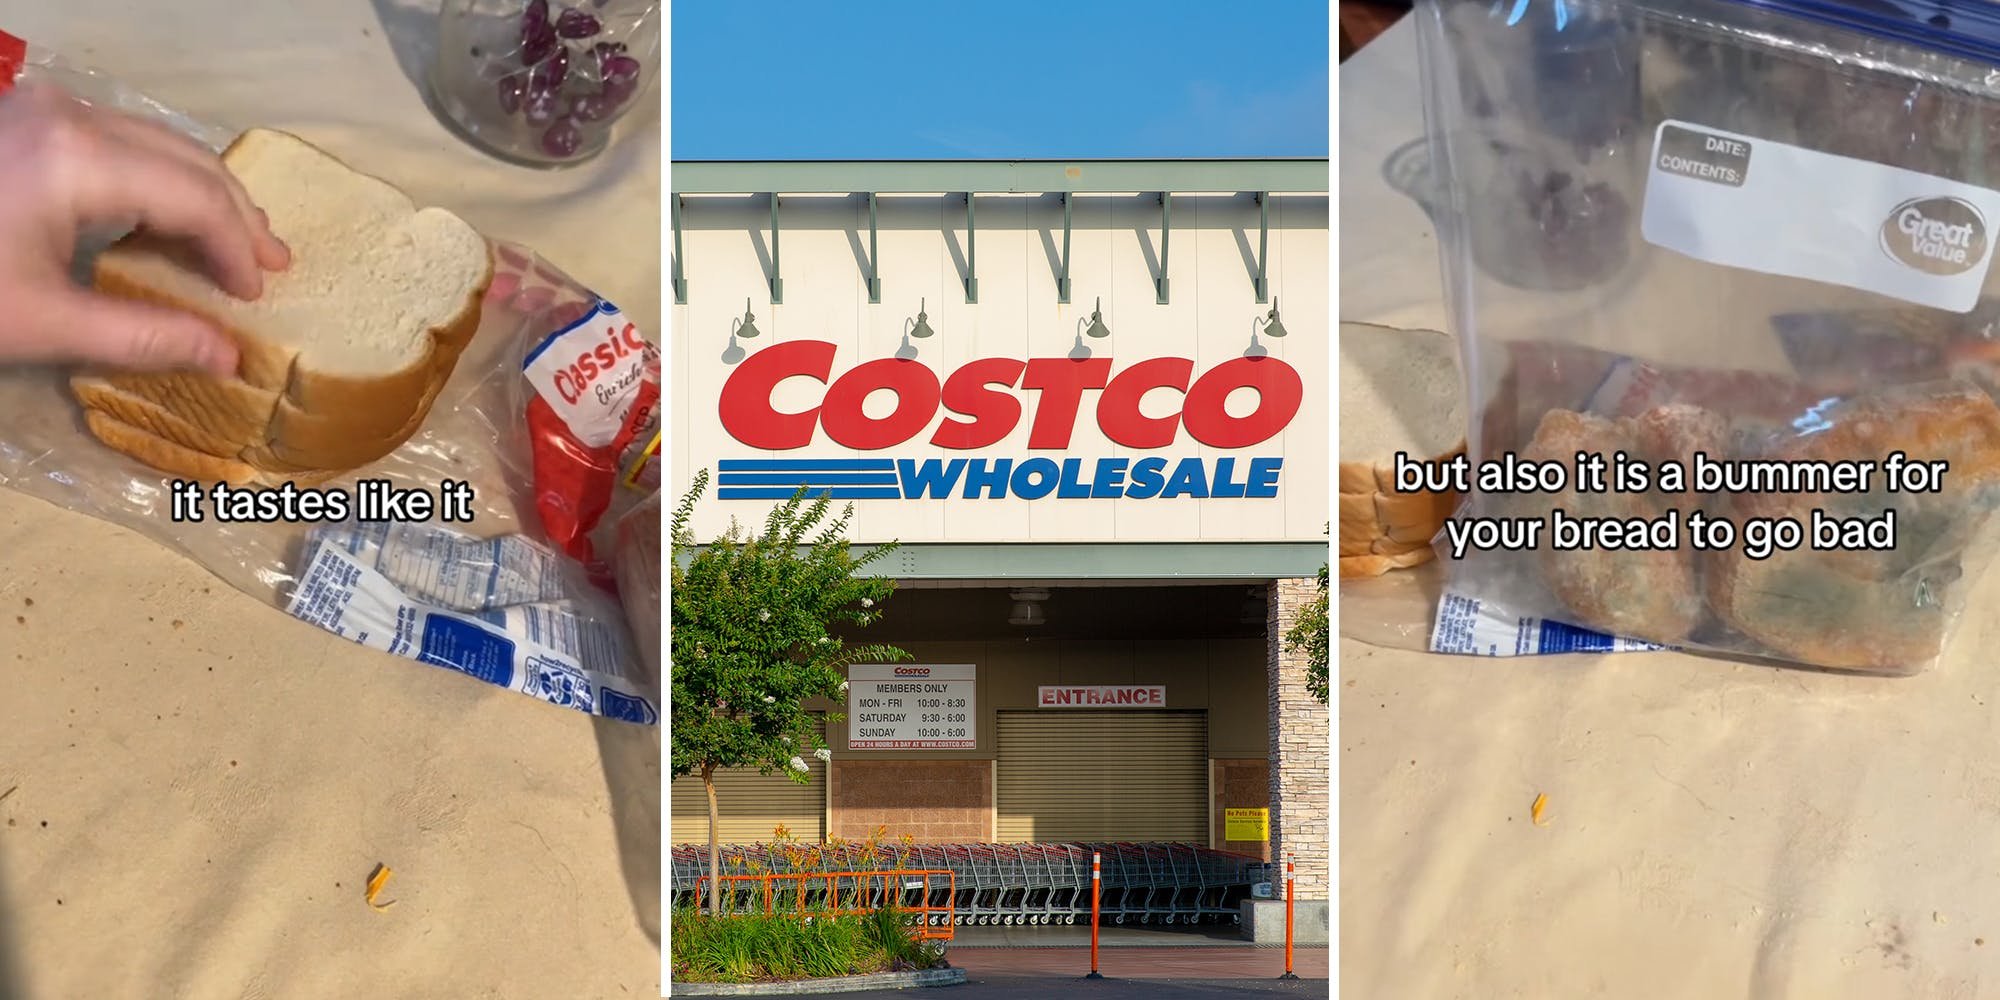 'I have been saying this for years': Costco shopper's bread gets mold after a few days. Here's why she says that's a good thing